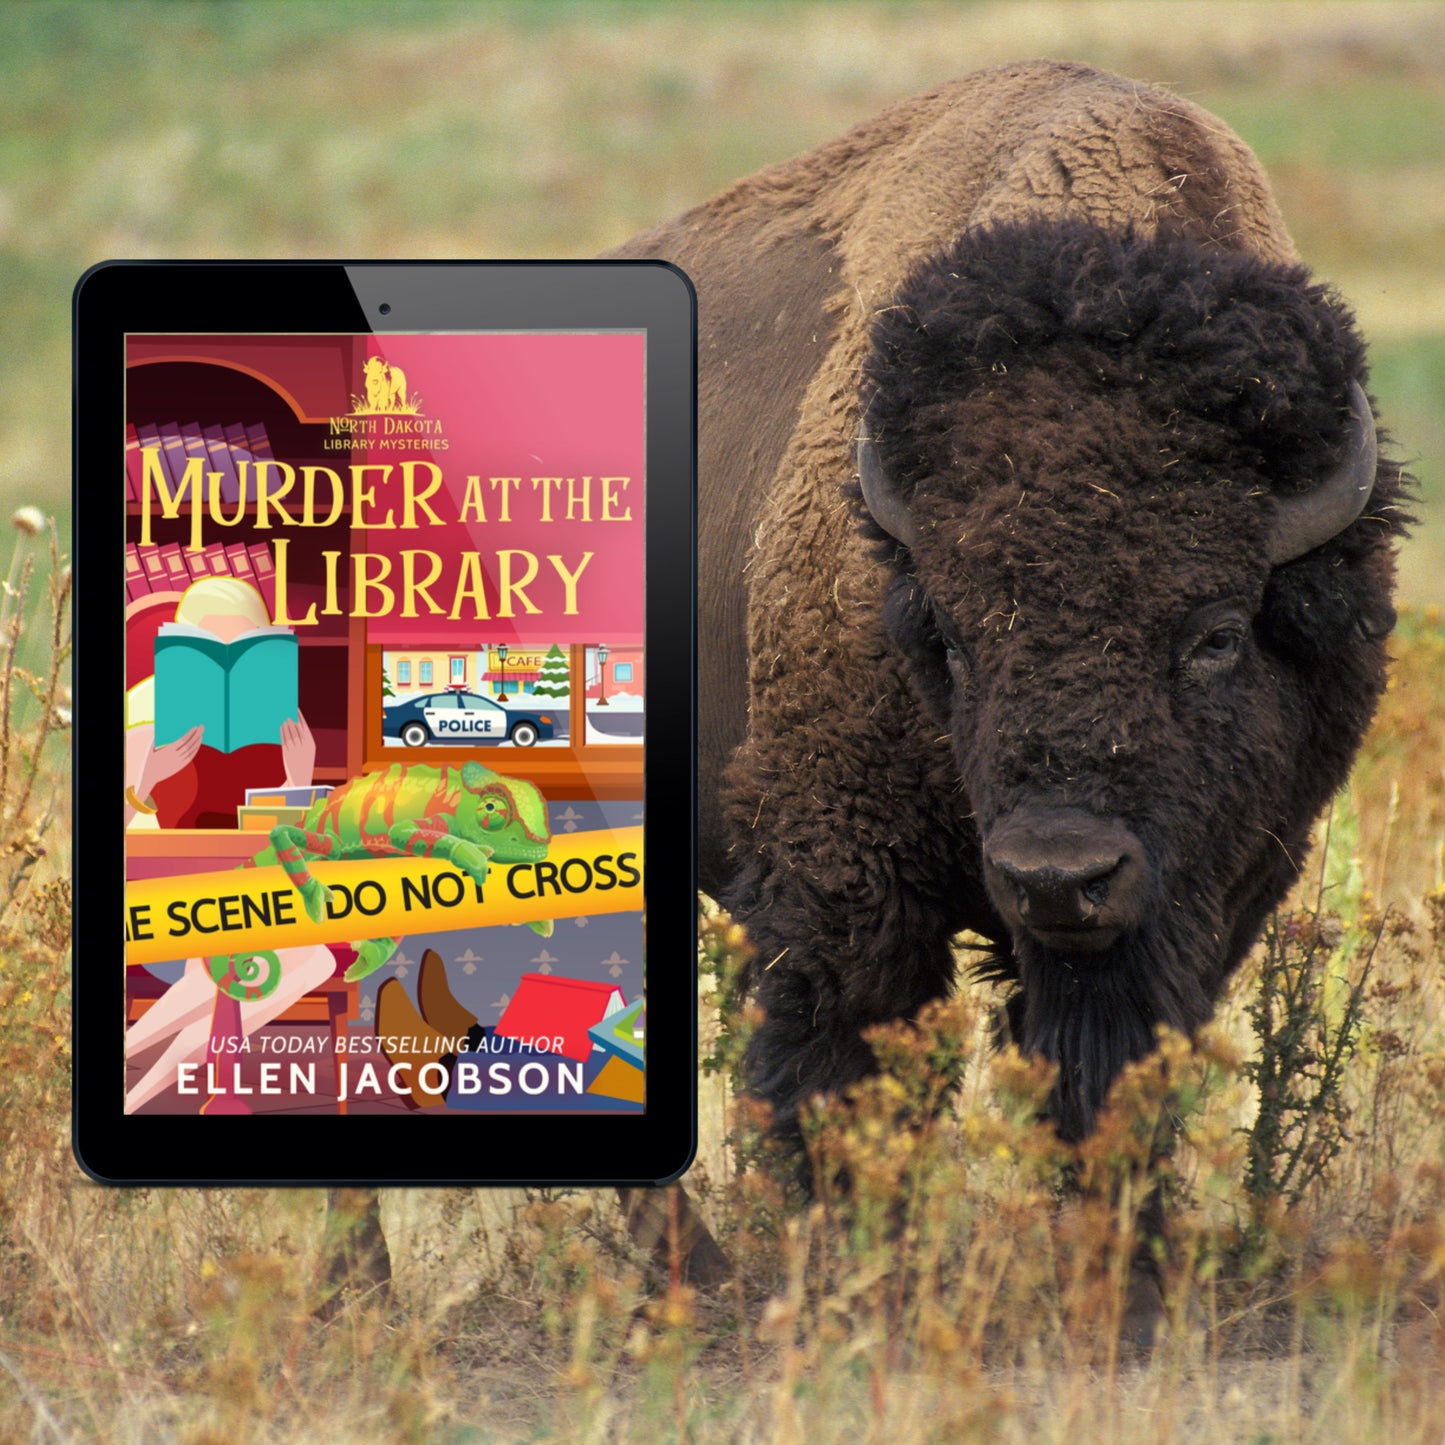 Murder at the Library cozy mystery ebook cover with picture of buffalo (bison)